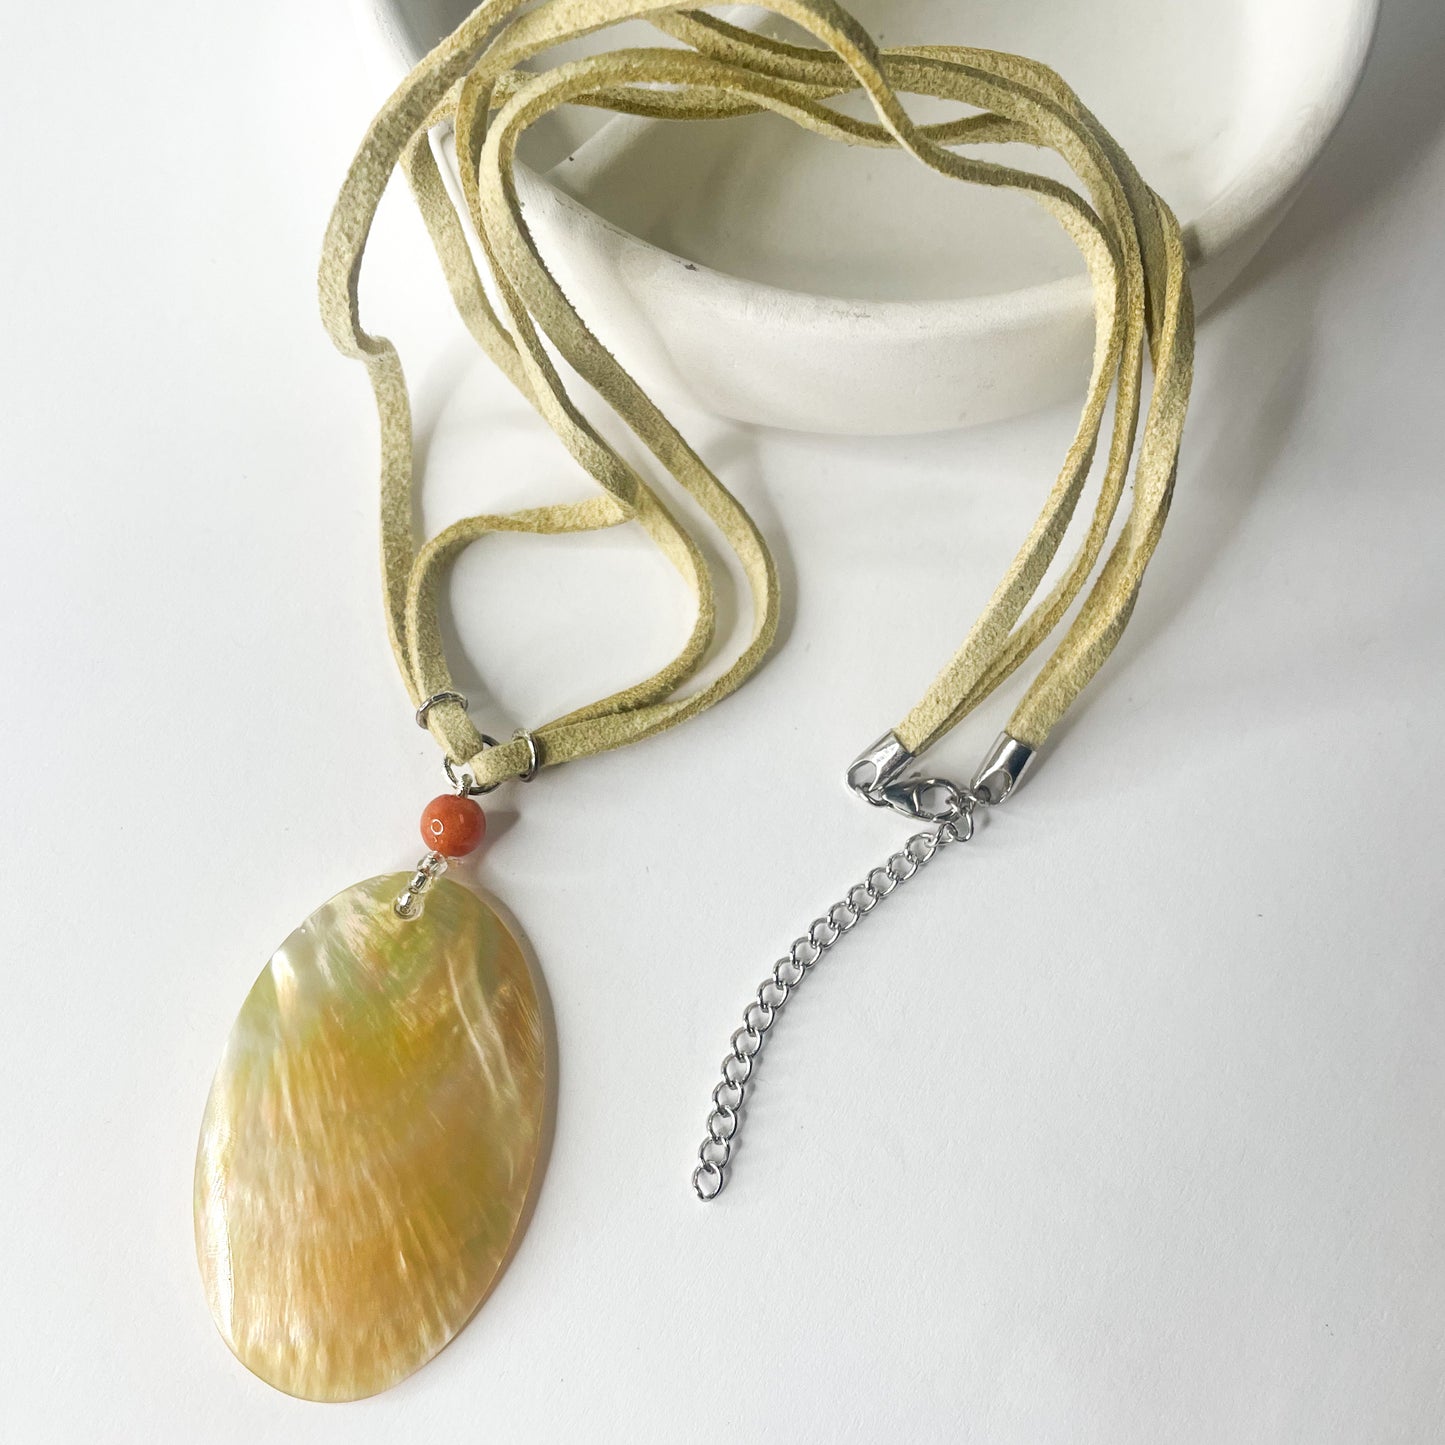 Golden Natural Shell on Leather Necklace - SSS